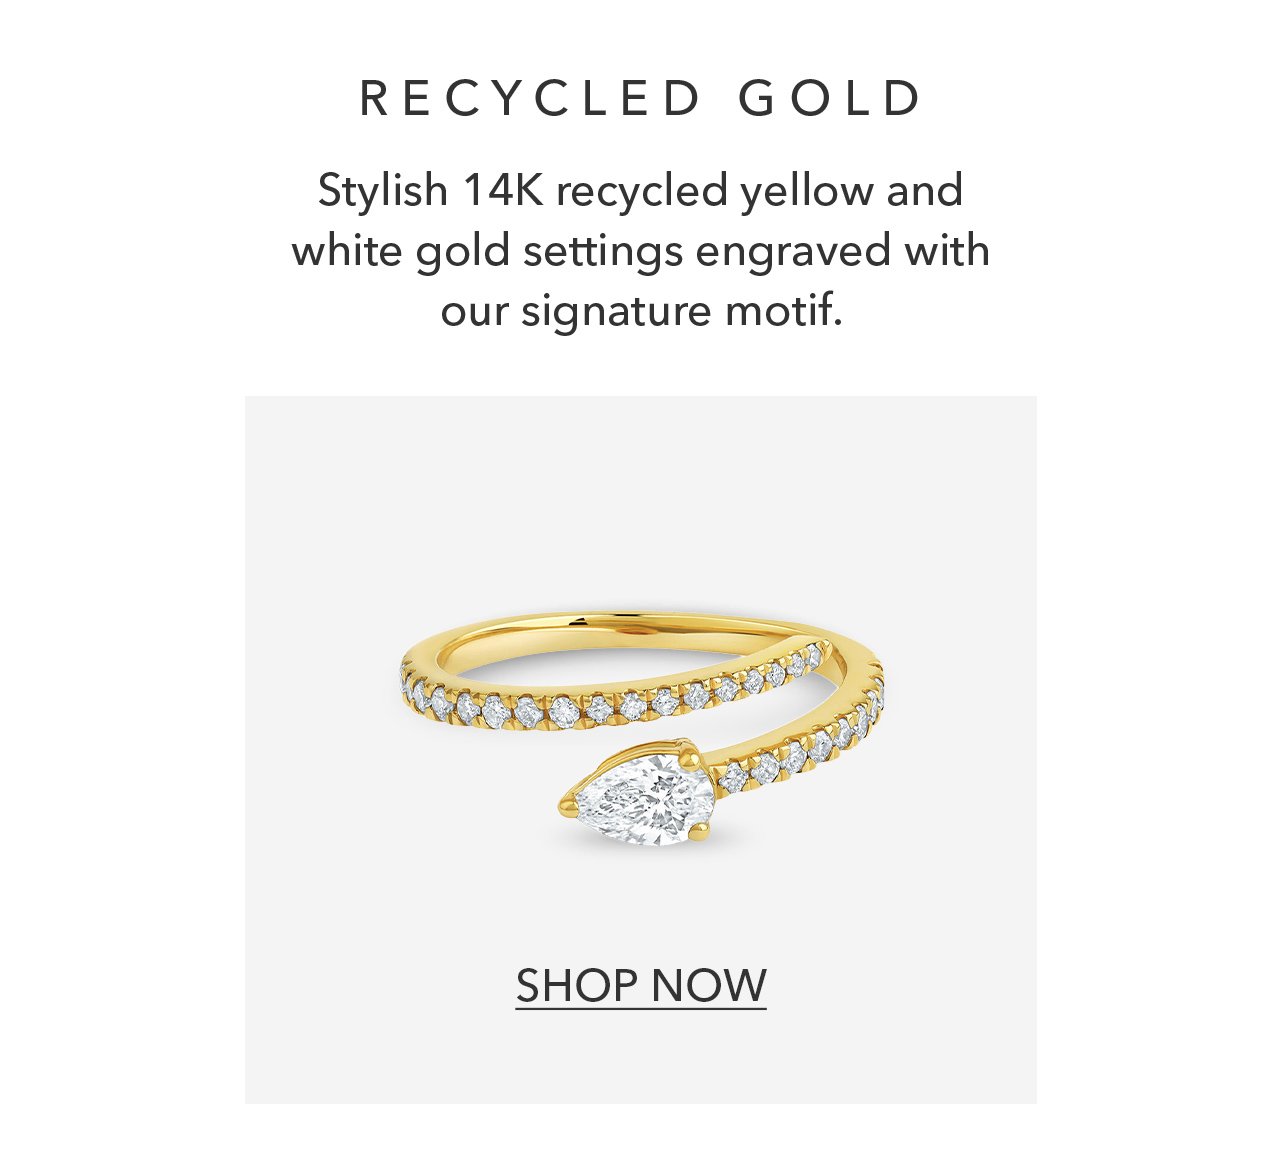 RECYCLED GOLD | Stylish 14K recycled yellow and white gold settings engraved with our signature motif. SHOP NOW